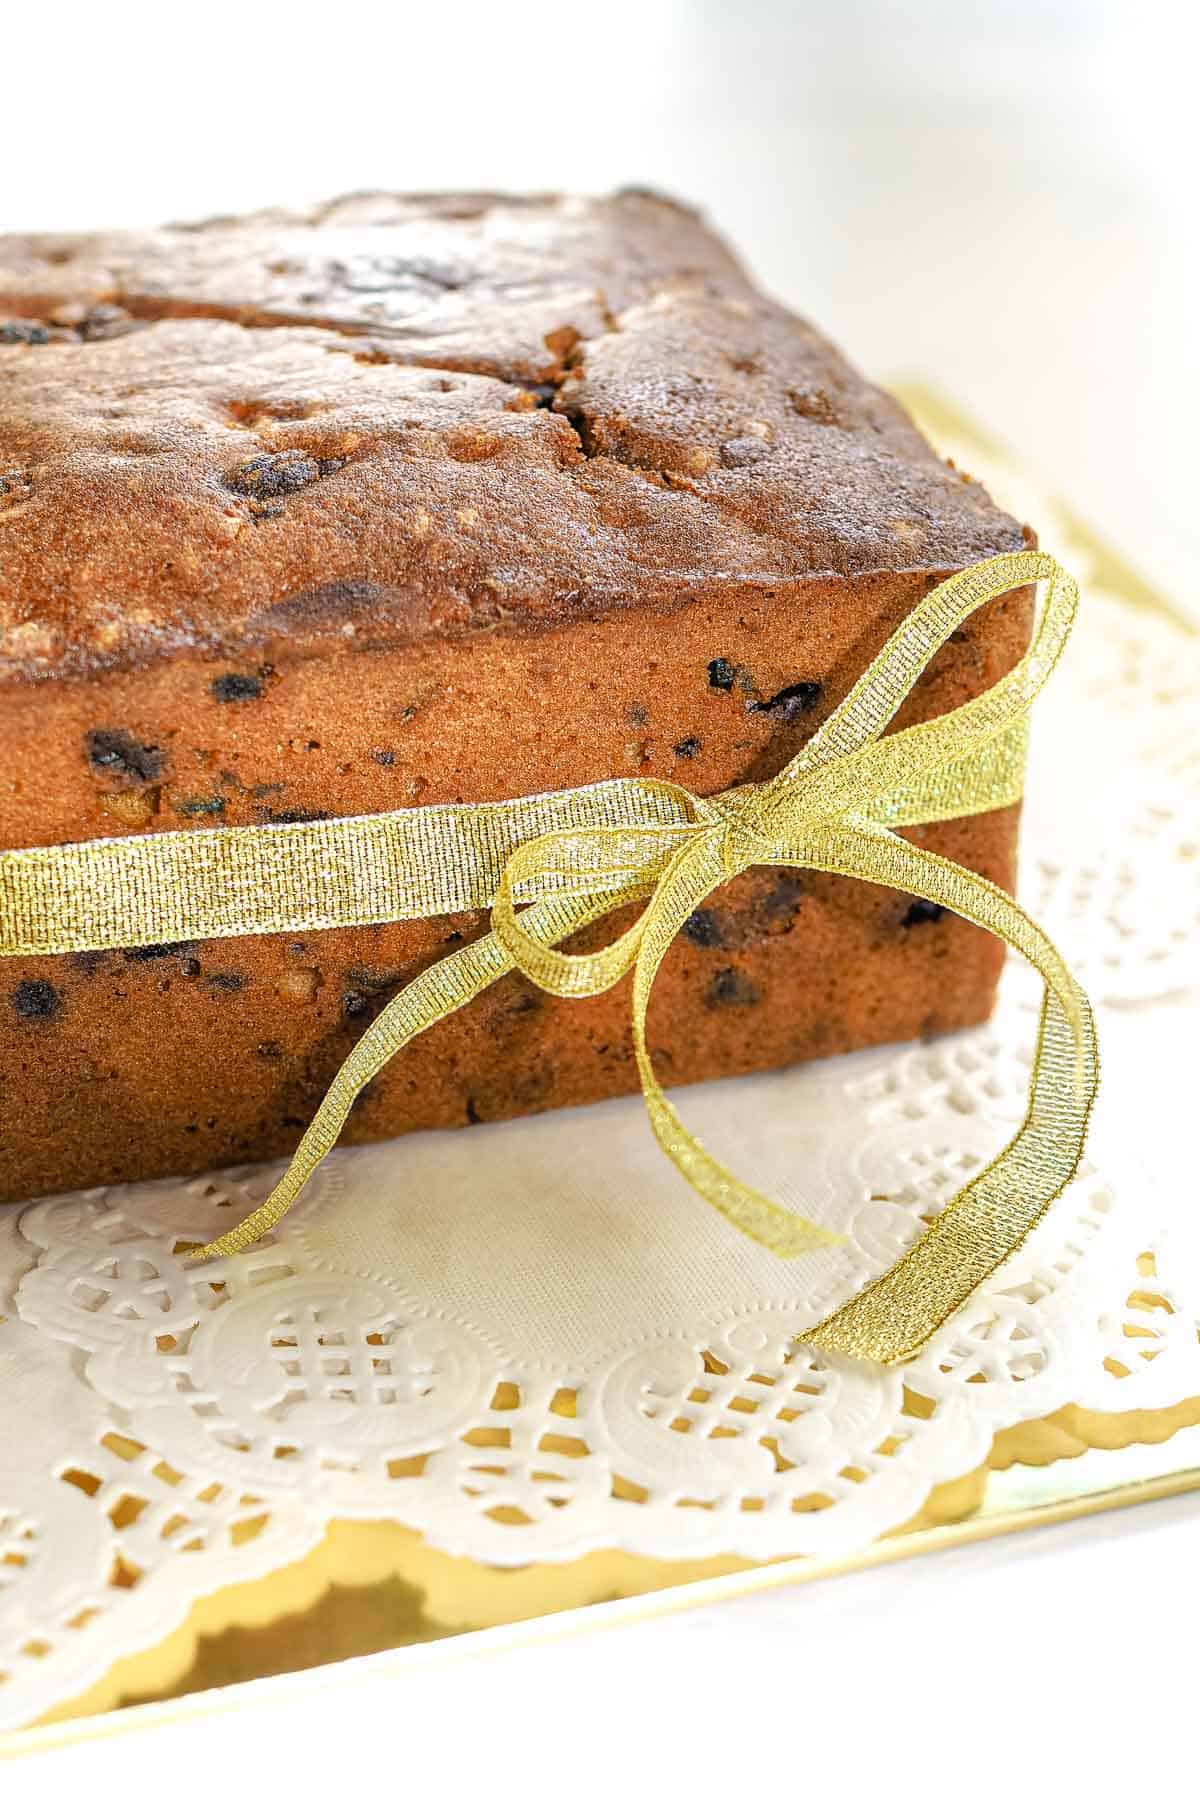 A tall fruit cake baked in a deep cake pan